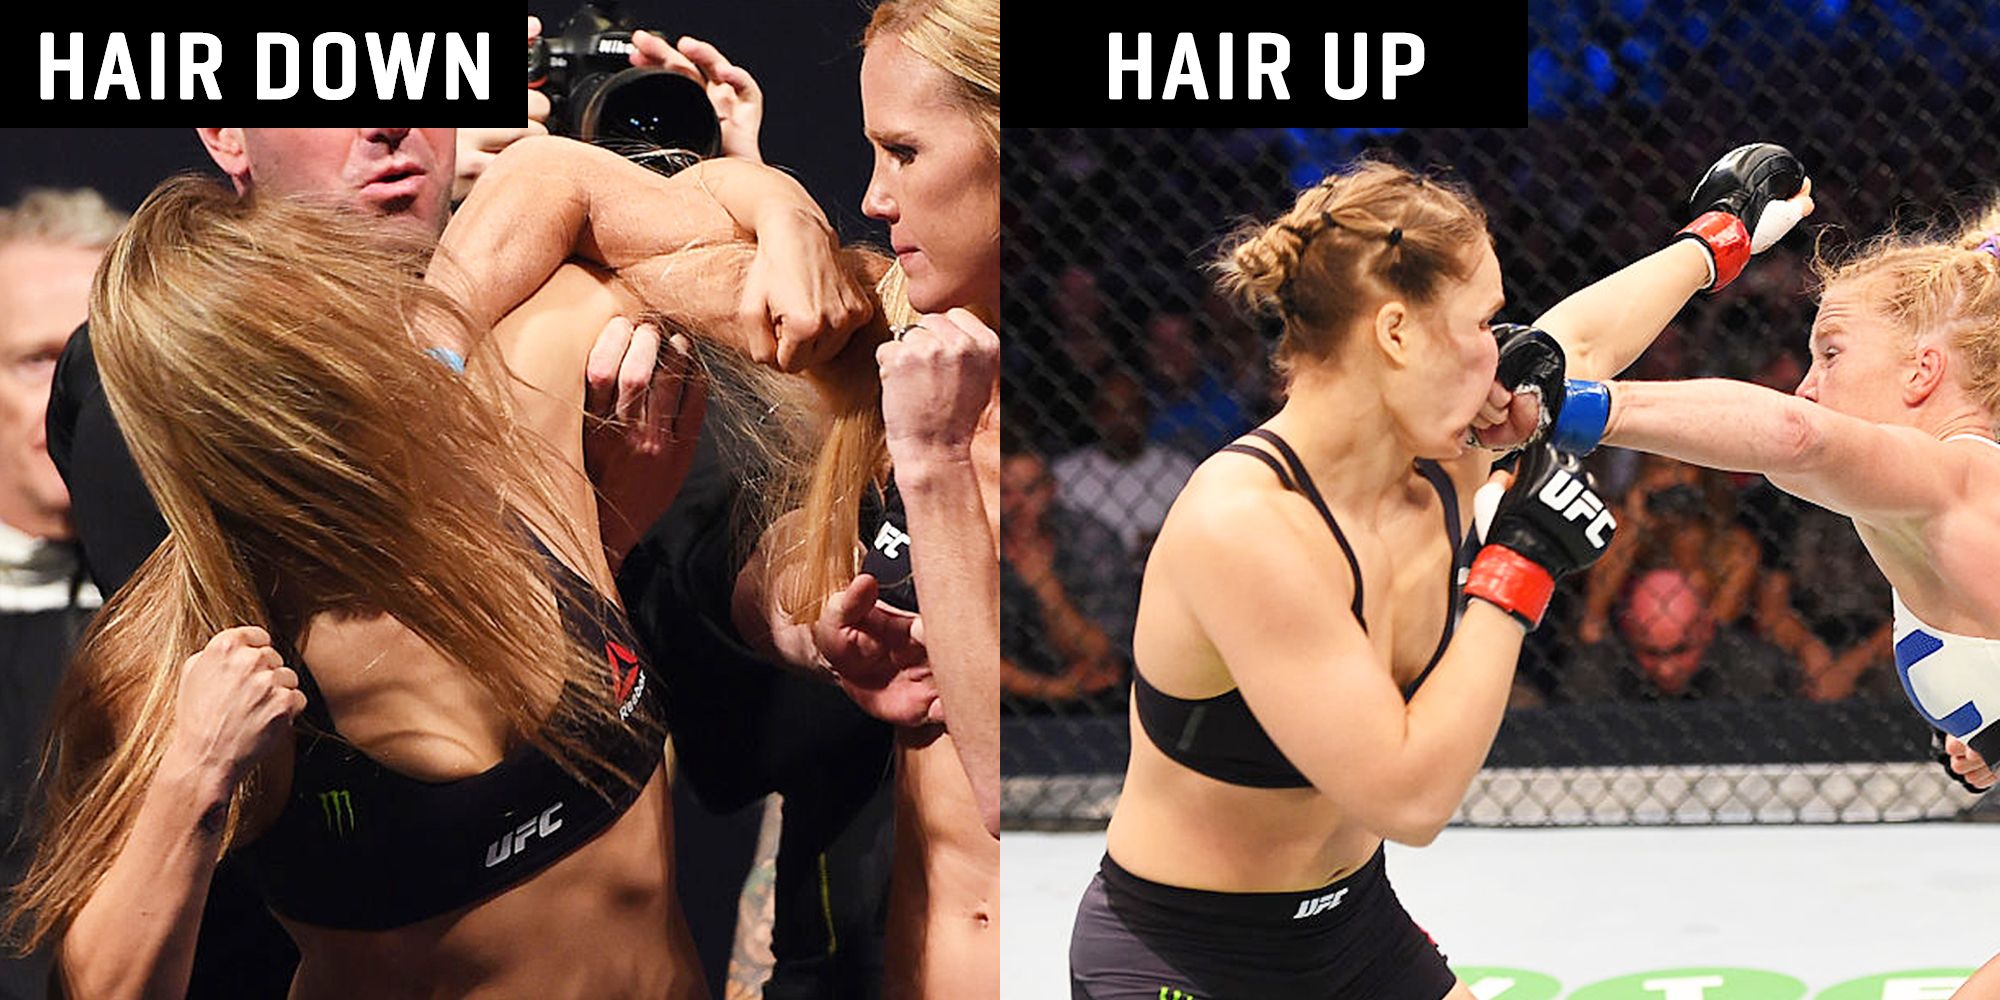 Ronda Rousey's Hack to Secure Her Hair While She Fights Is Genius